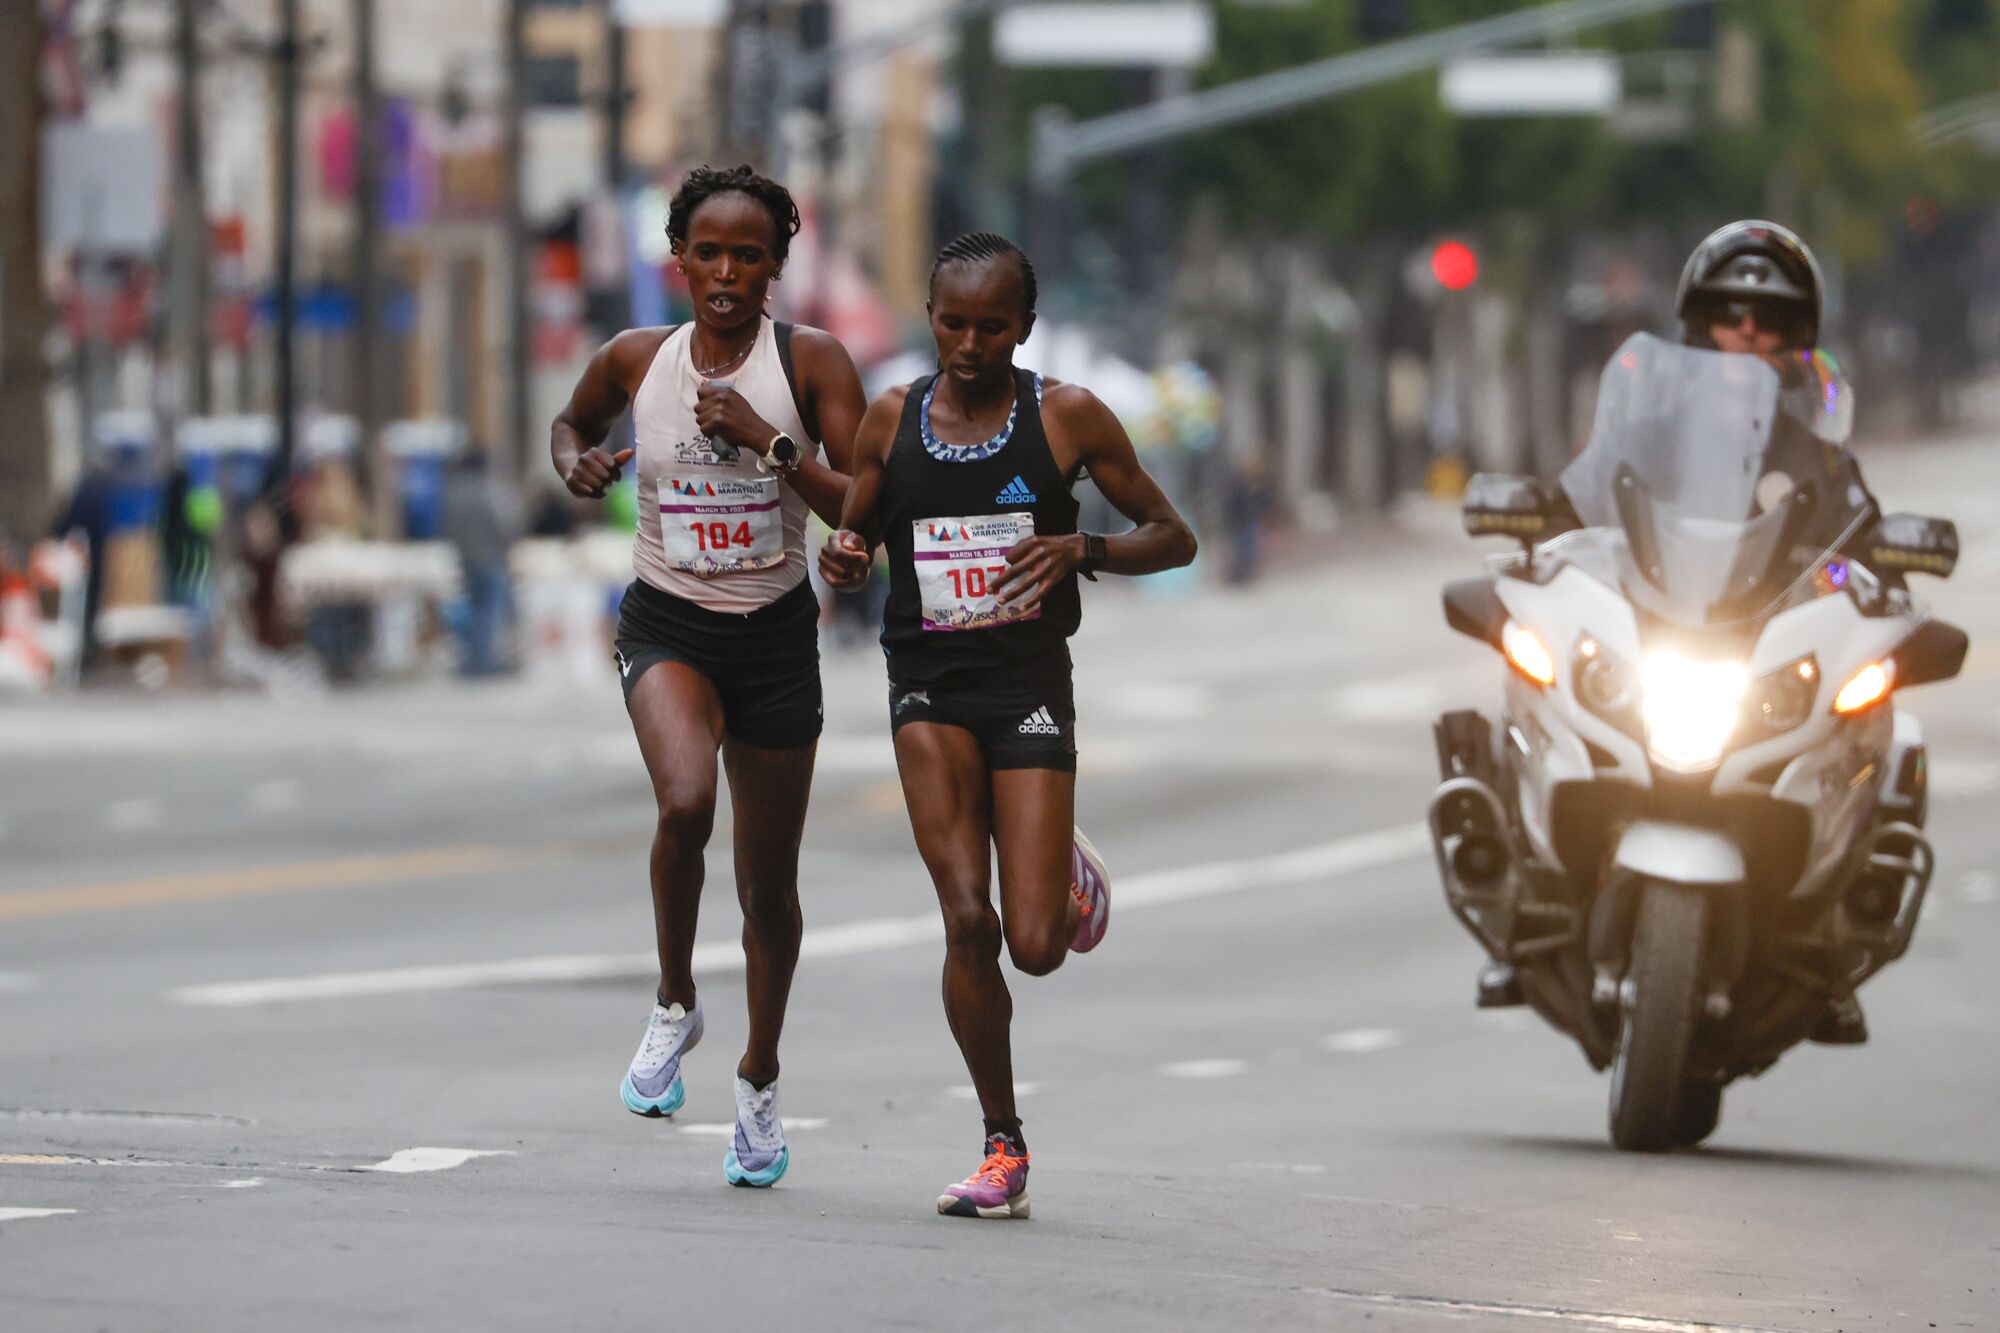 Elite female runners run along Hollywood Blvd during the 38th LA Marathon in Los Angeles on Sunday